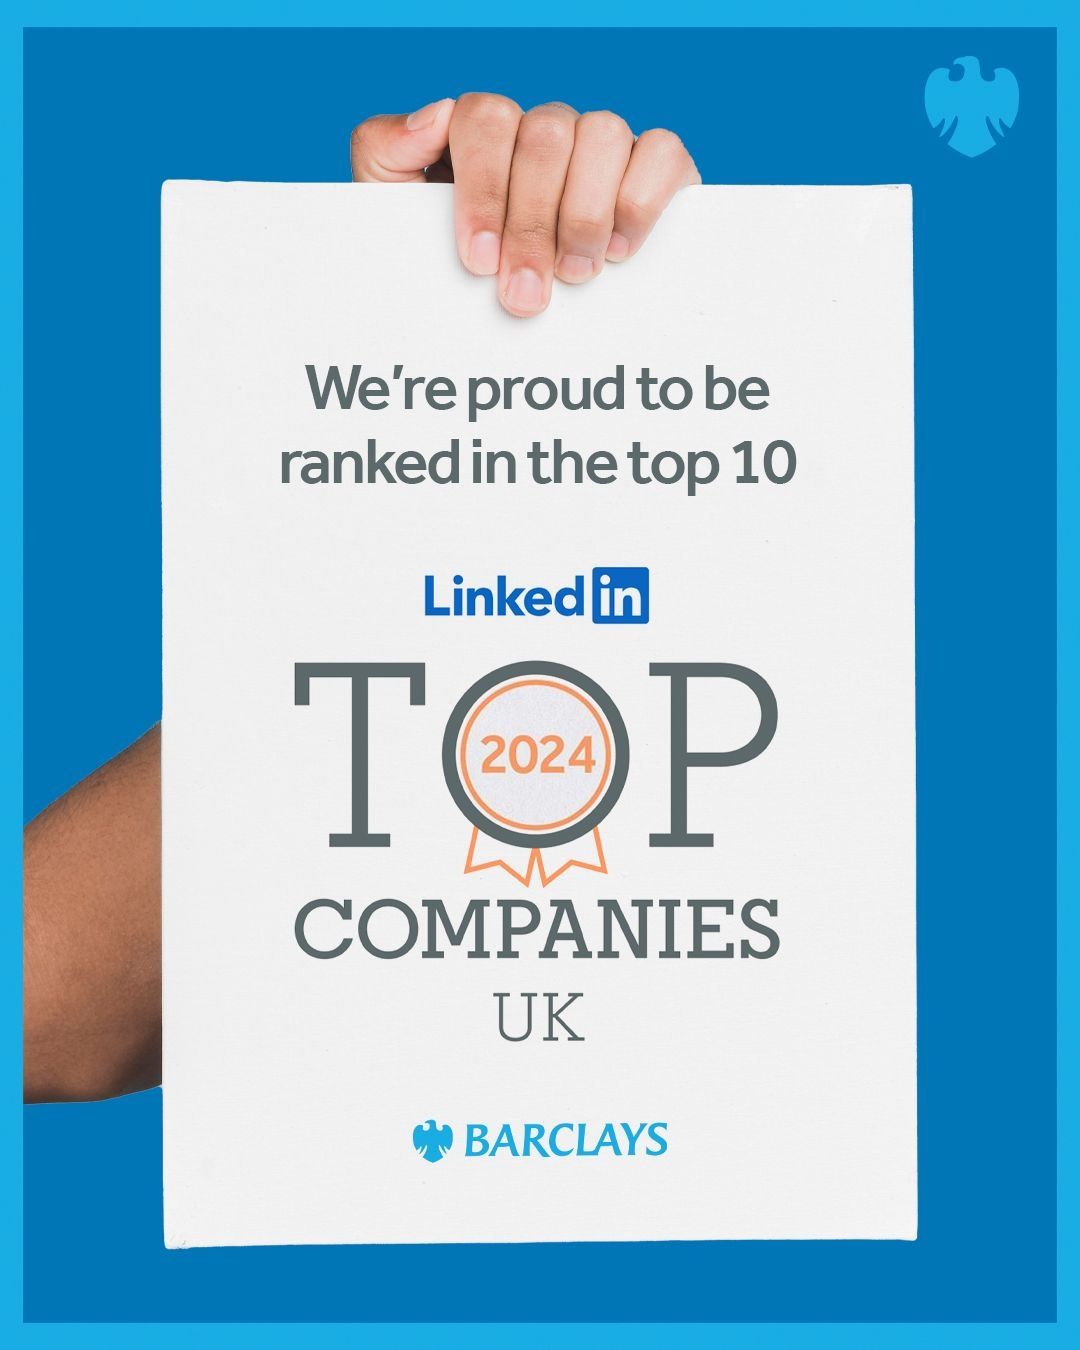 Kerry Payne on LinkedIn: Barclays on LinkedIn: We're proud to announce ...